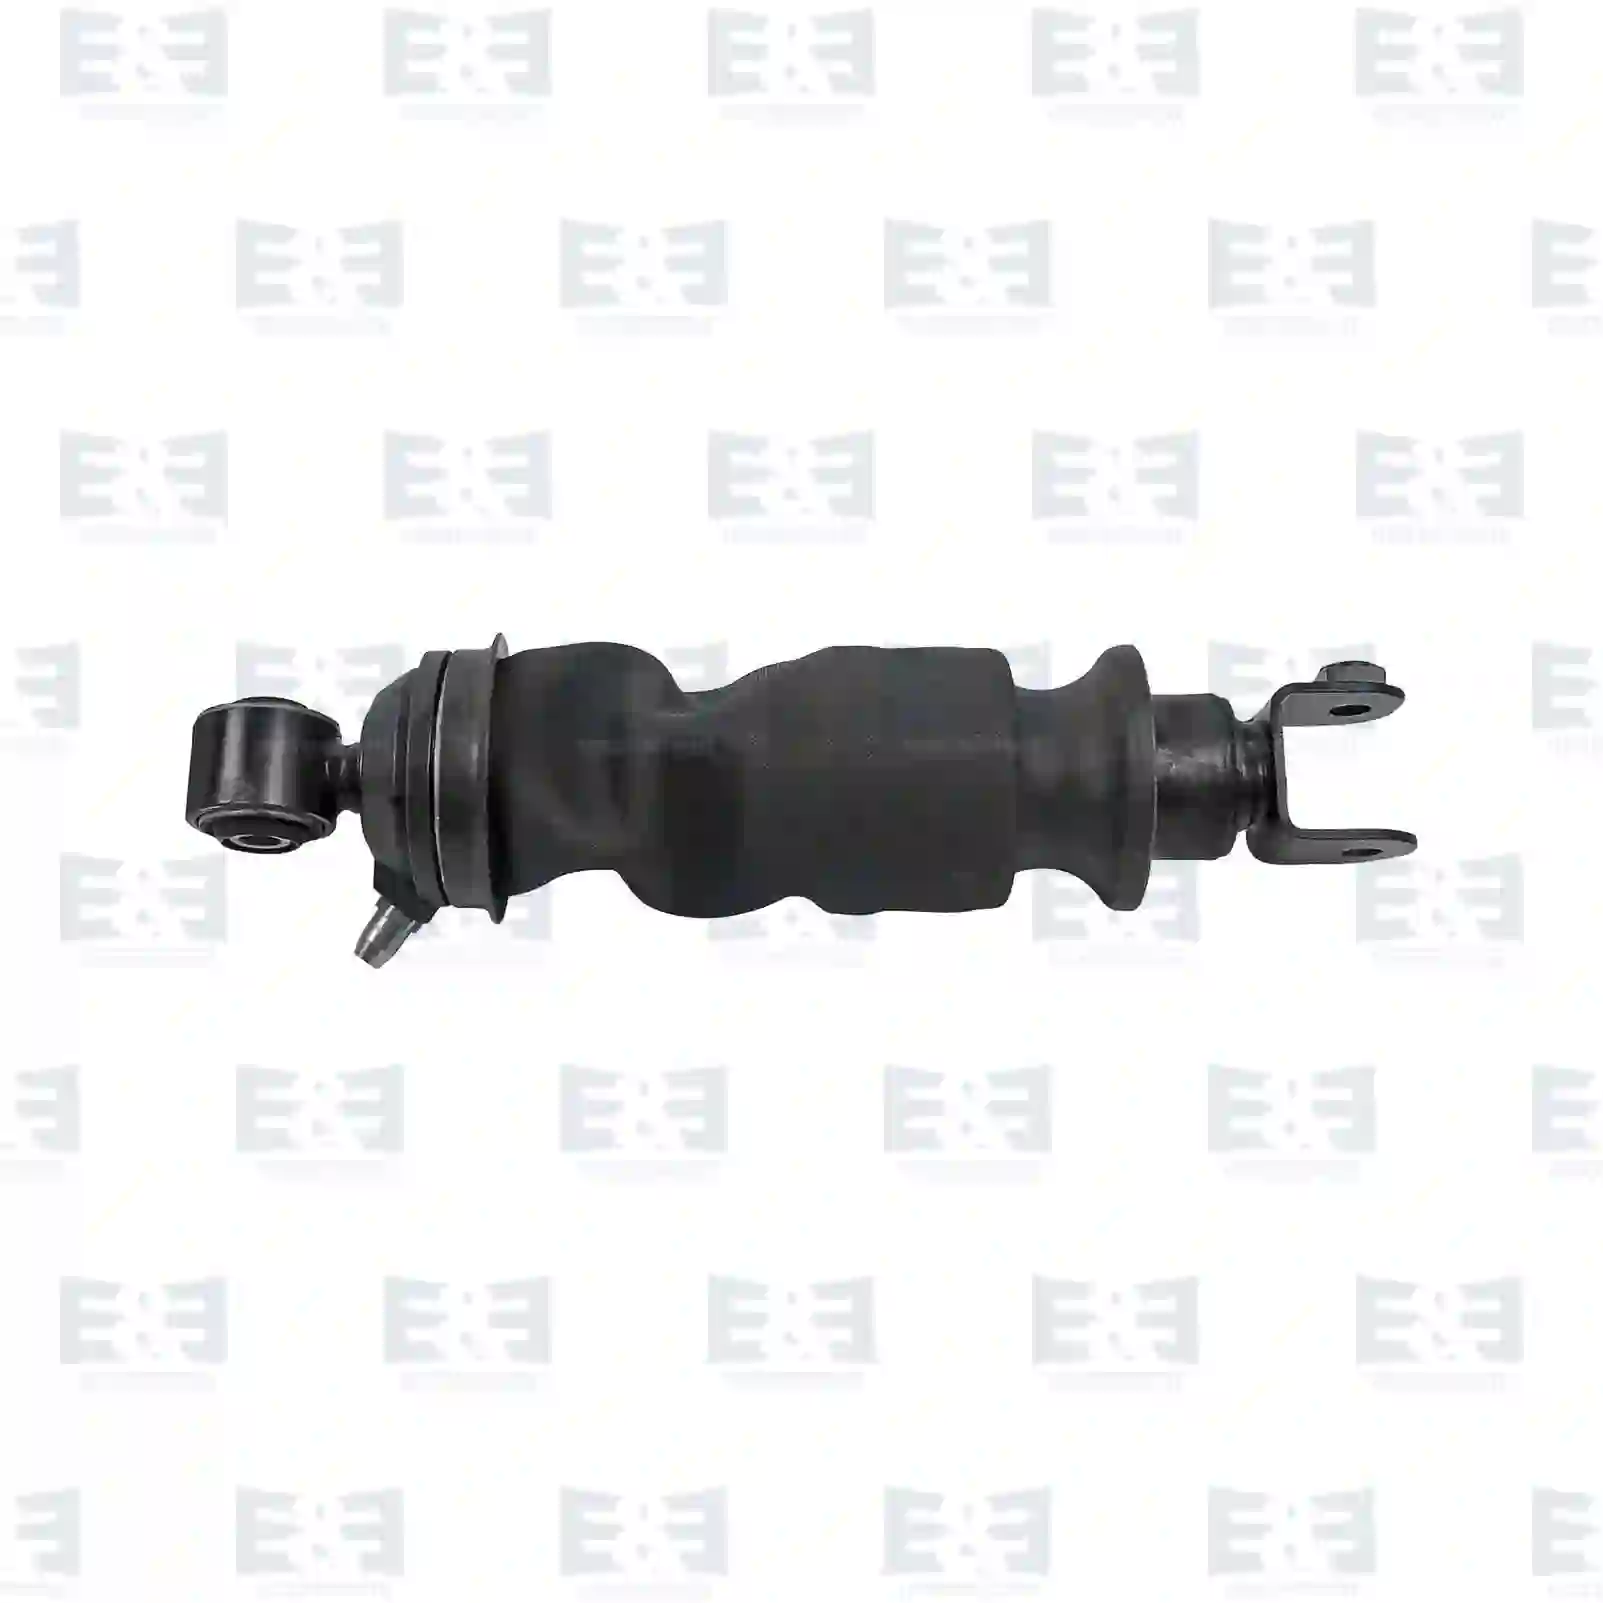 Cabin shock absorber, with air bellow, 2E2274088, 1923645, , , , ||  2E2274088 E&E Truck Spare Parts | Truck Spare Parts, Auotomotive Spare Parts Cabin shock absorber, with air bellow, 2E2274088, 1923645, , , , ||  2E2274088 E&E Truck Spare Parts | Truck Spare Parts, Auotomotive Spare Parts